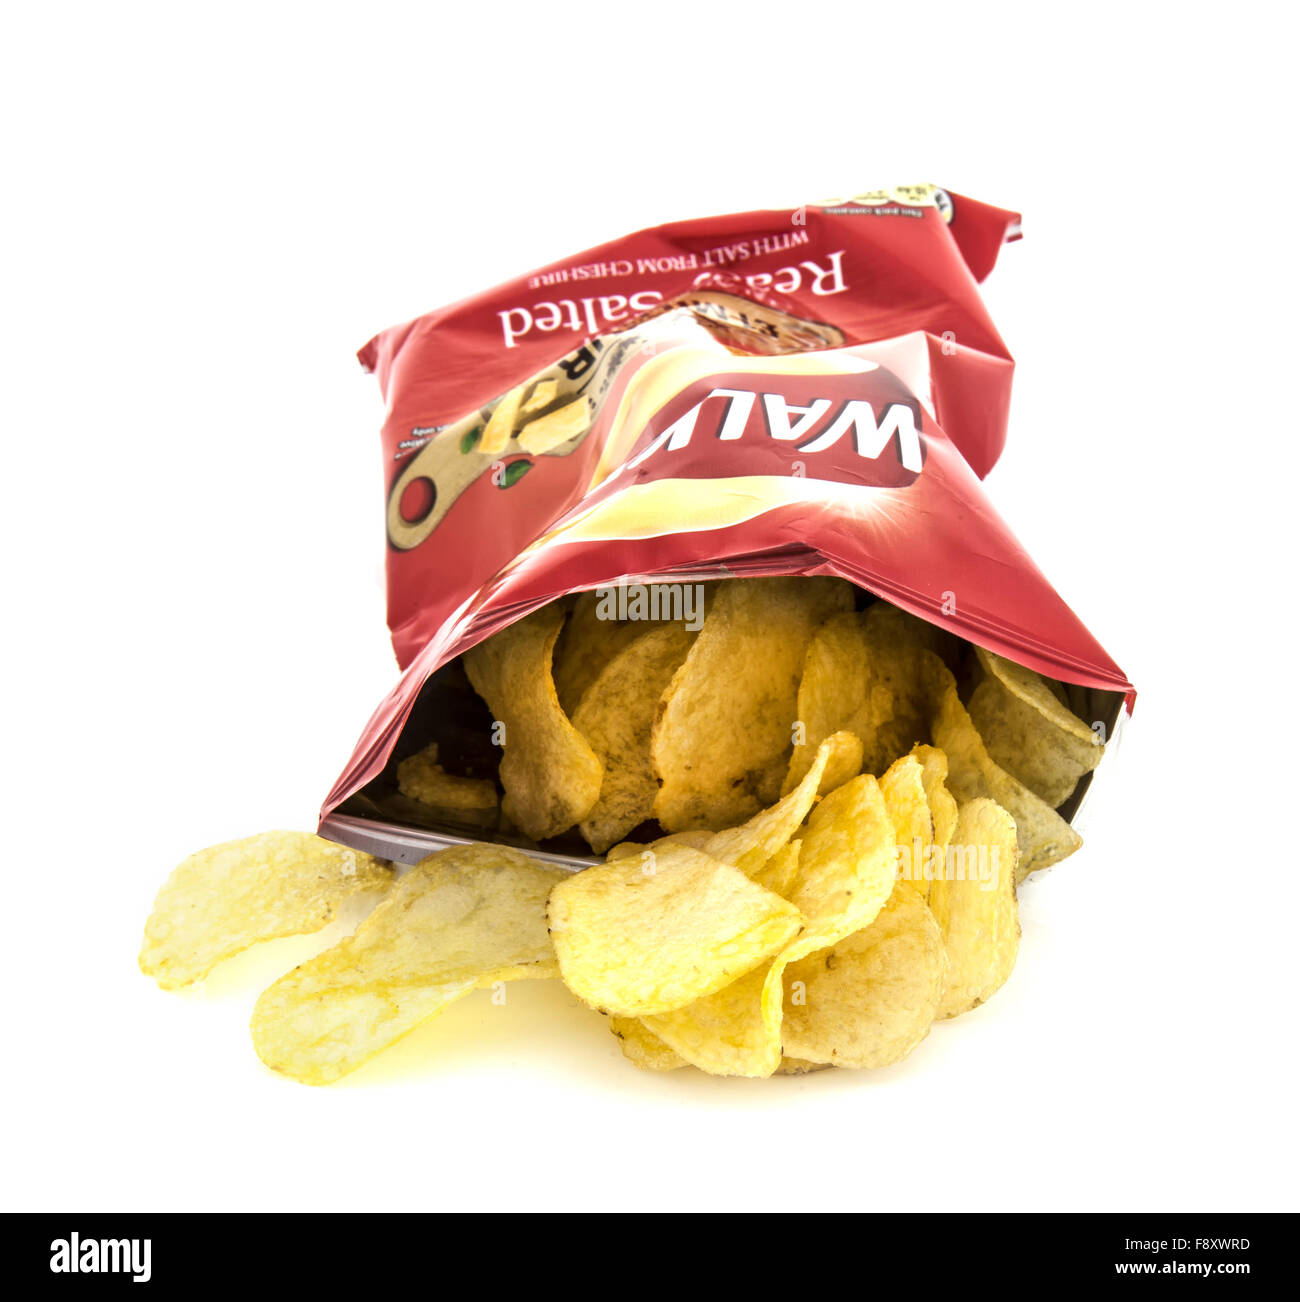 Packet of Walkers ready salted crisps on a white background Stock Photo -  Alamy